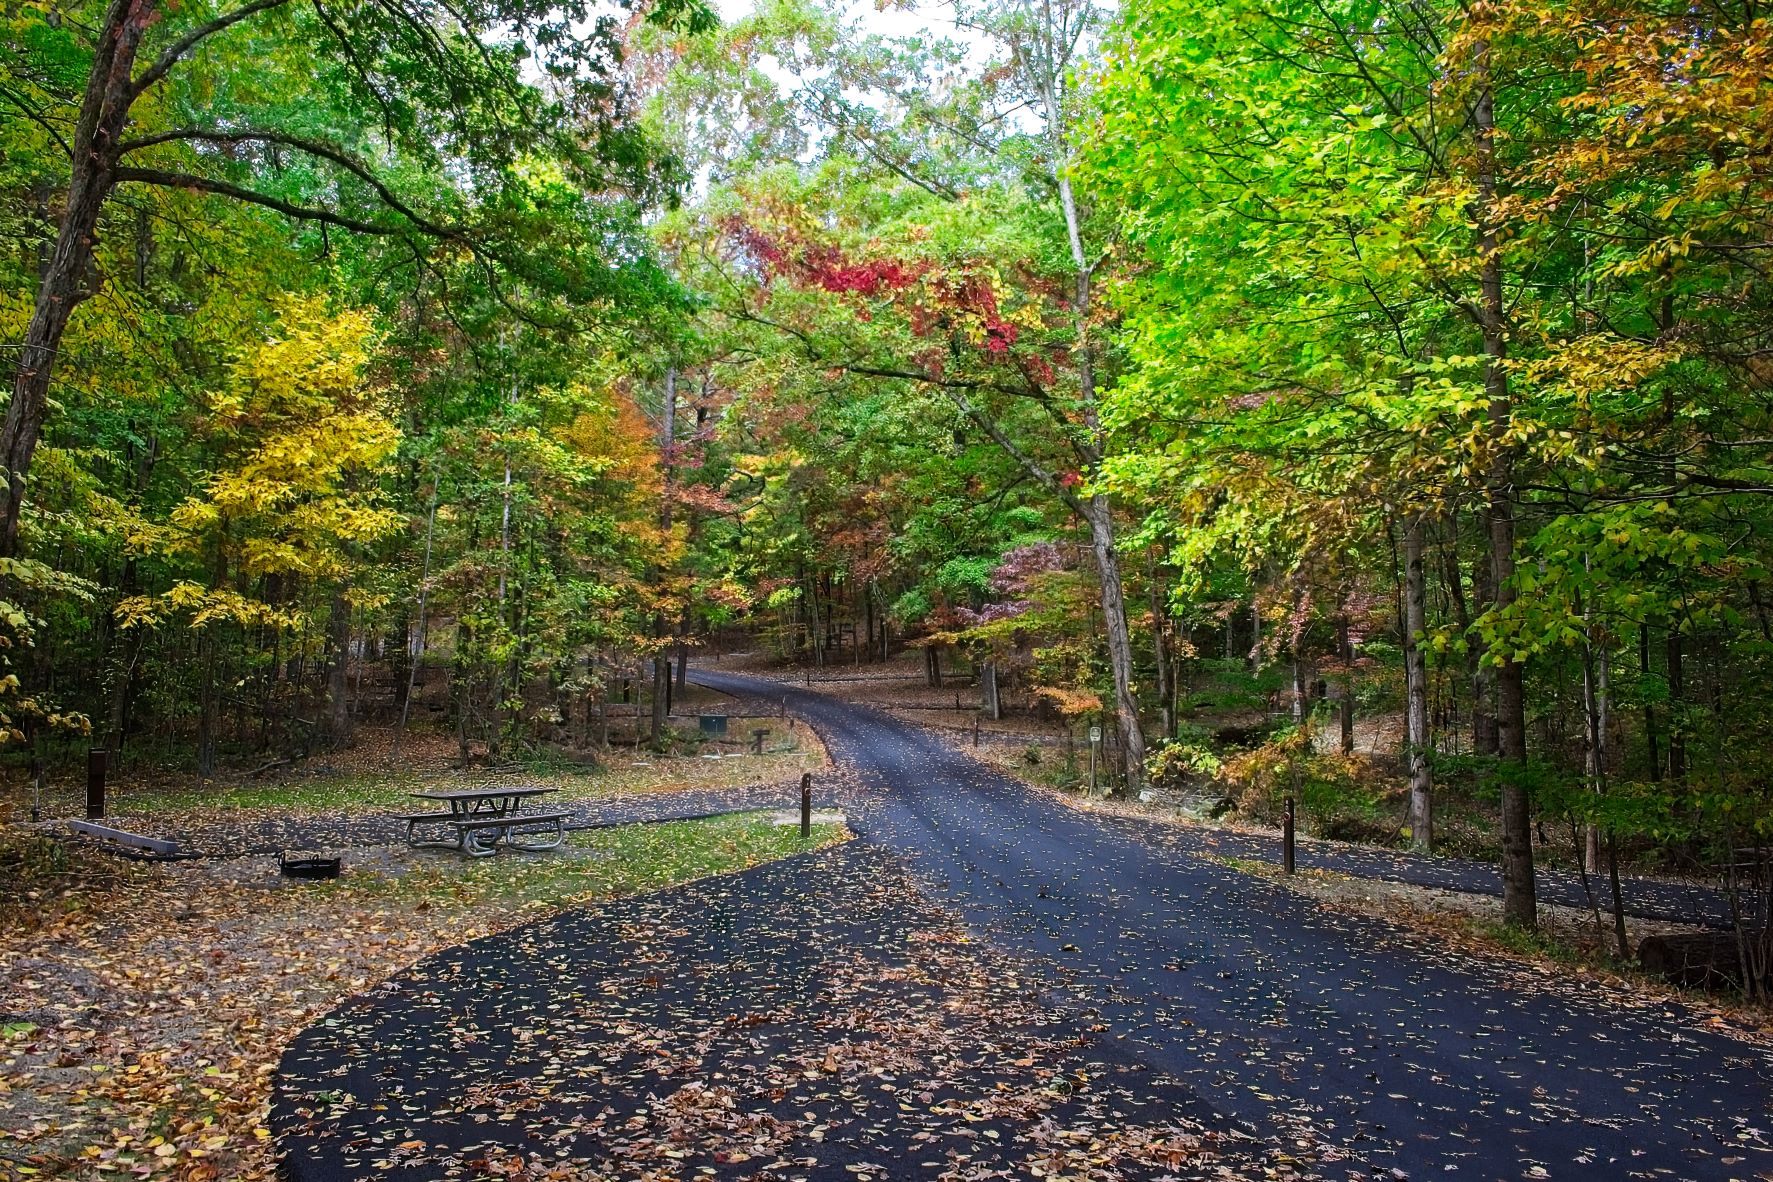 A campground road with individual sites visible surrounded by trees beginning to turn yellow, red, and orange for fall. Fallen leaves sprinkle the ground.